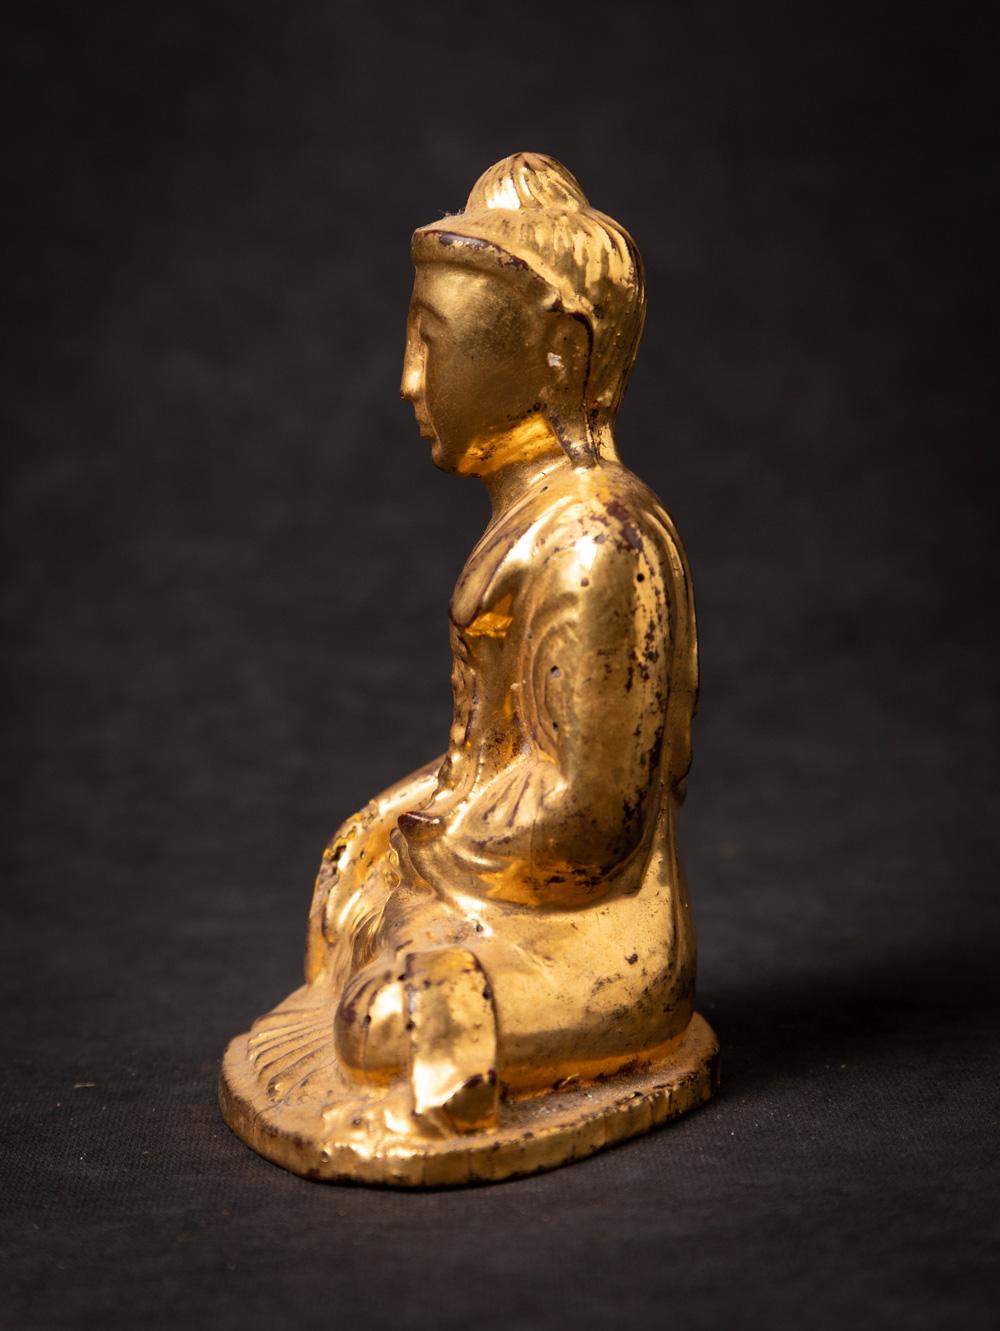 Material : wood
13,7 cm high
10,1 cm wide and 7,4 cm deep
Gilded with 24 krt. gold
Mandalay style
Bhumisparsha mudra
19th century
Has already been treated against woodworm
Weight: 61 grams
Originating from Burma
Nr: 2412-11